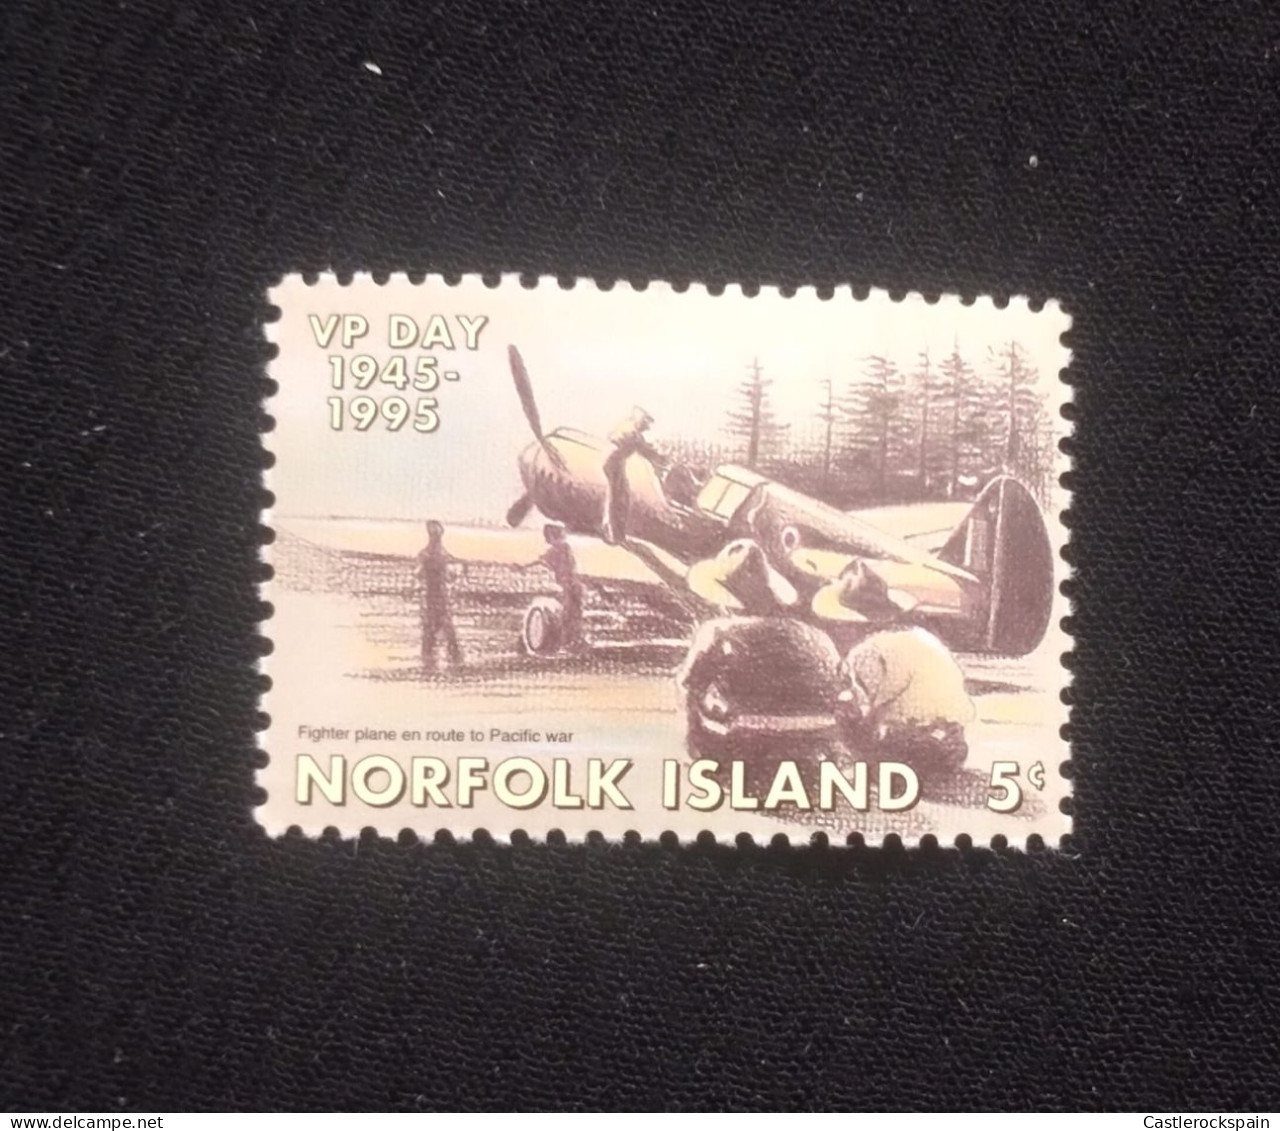 O) 1995 NORFOLK ISLAND, VP DAY,  FIGHTER PLANE EN ROUTE TO PACIFIC WAR, MNH - Norfolkinsel